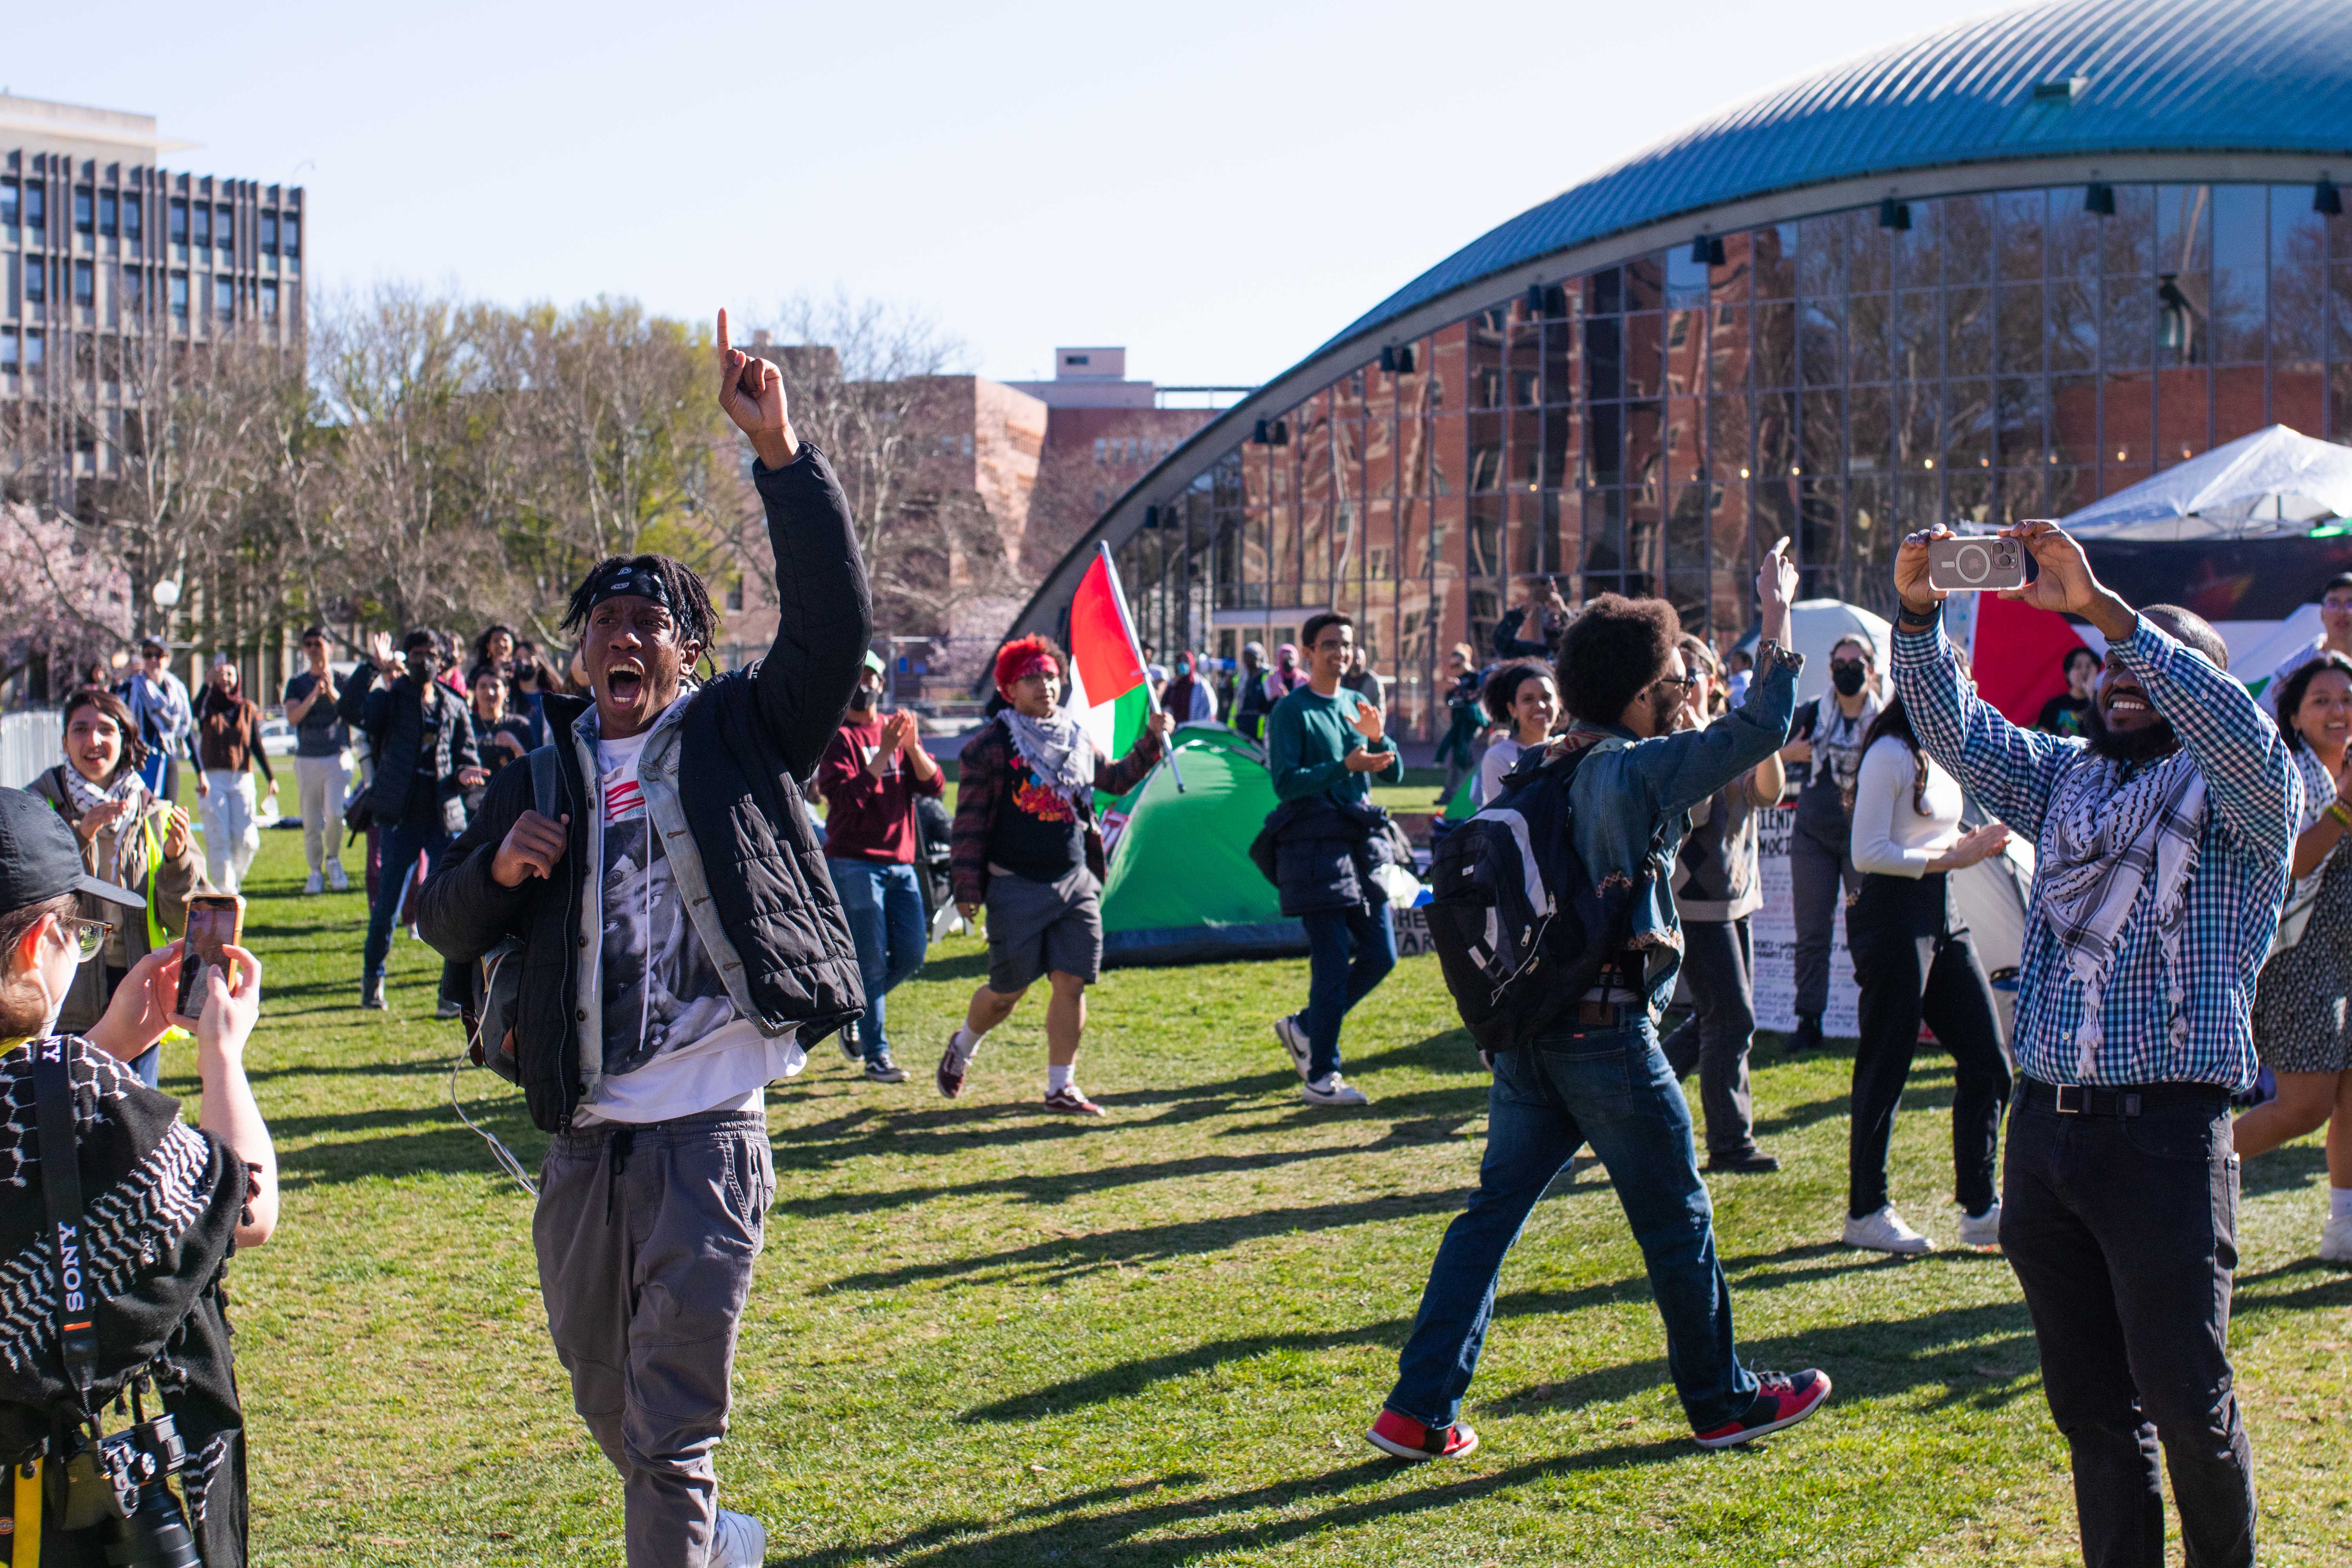 Kojo Acheampong ’26 chants at a rally outside of MIT. Nearly 50 Harvard affiliates rallied in solidarity with an MIT “Scientists Against Genocide” encampment protest. The encampment — set up by MIT affiliates Sunday evening on Kresge Lawn — consisted of at least 15 tents with Palestinian flags and cardboard signs.